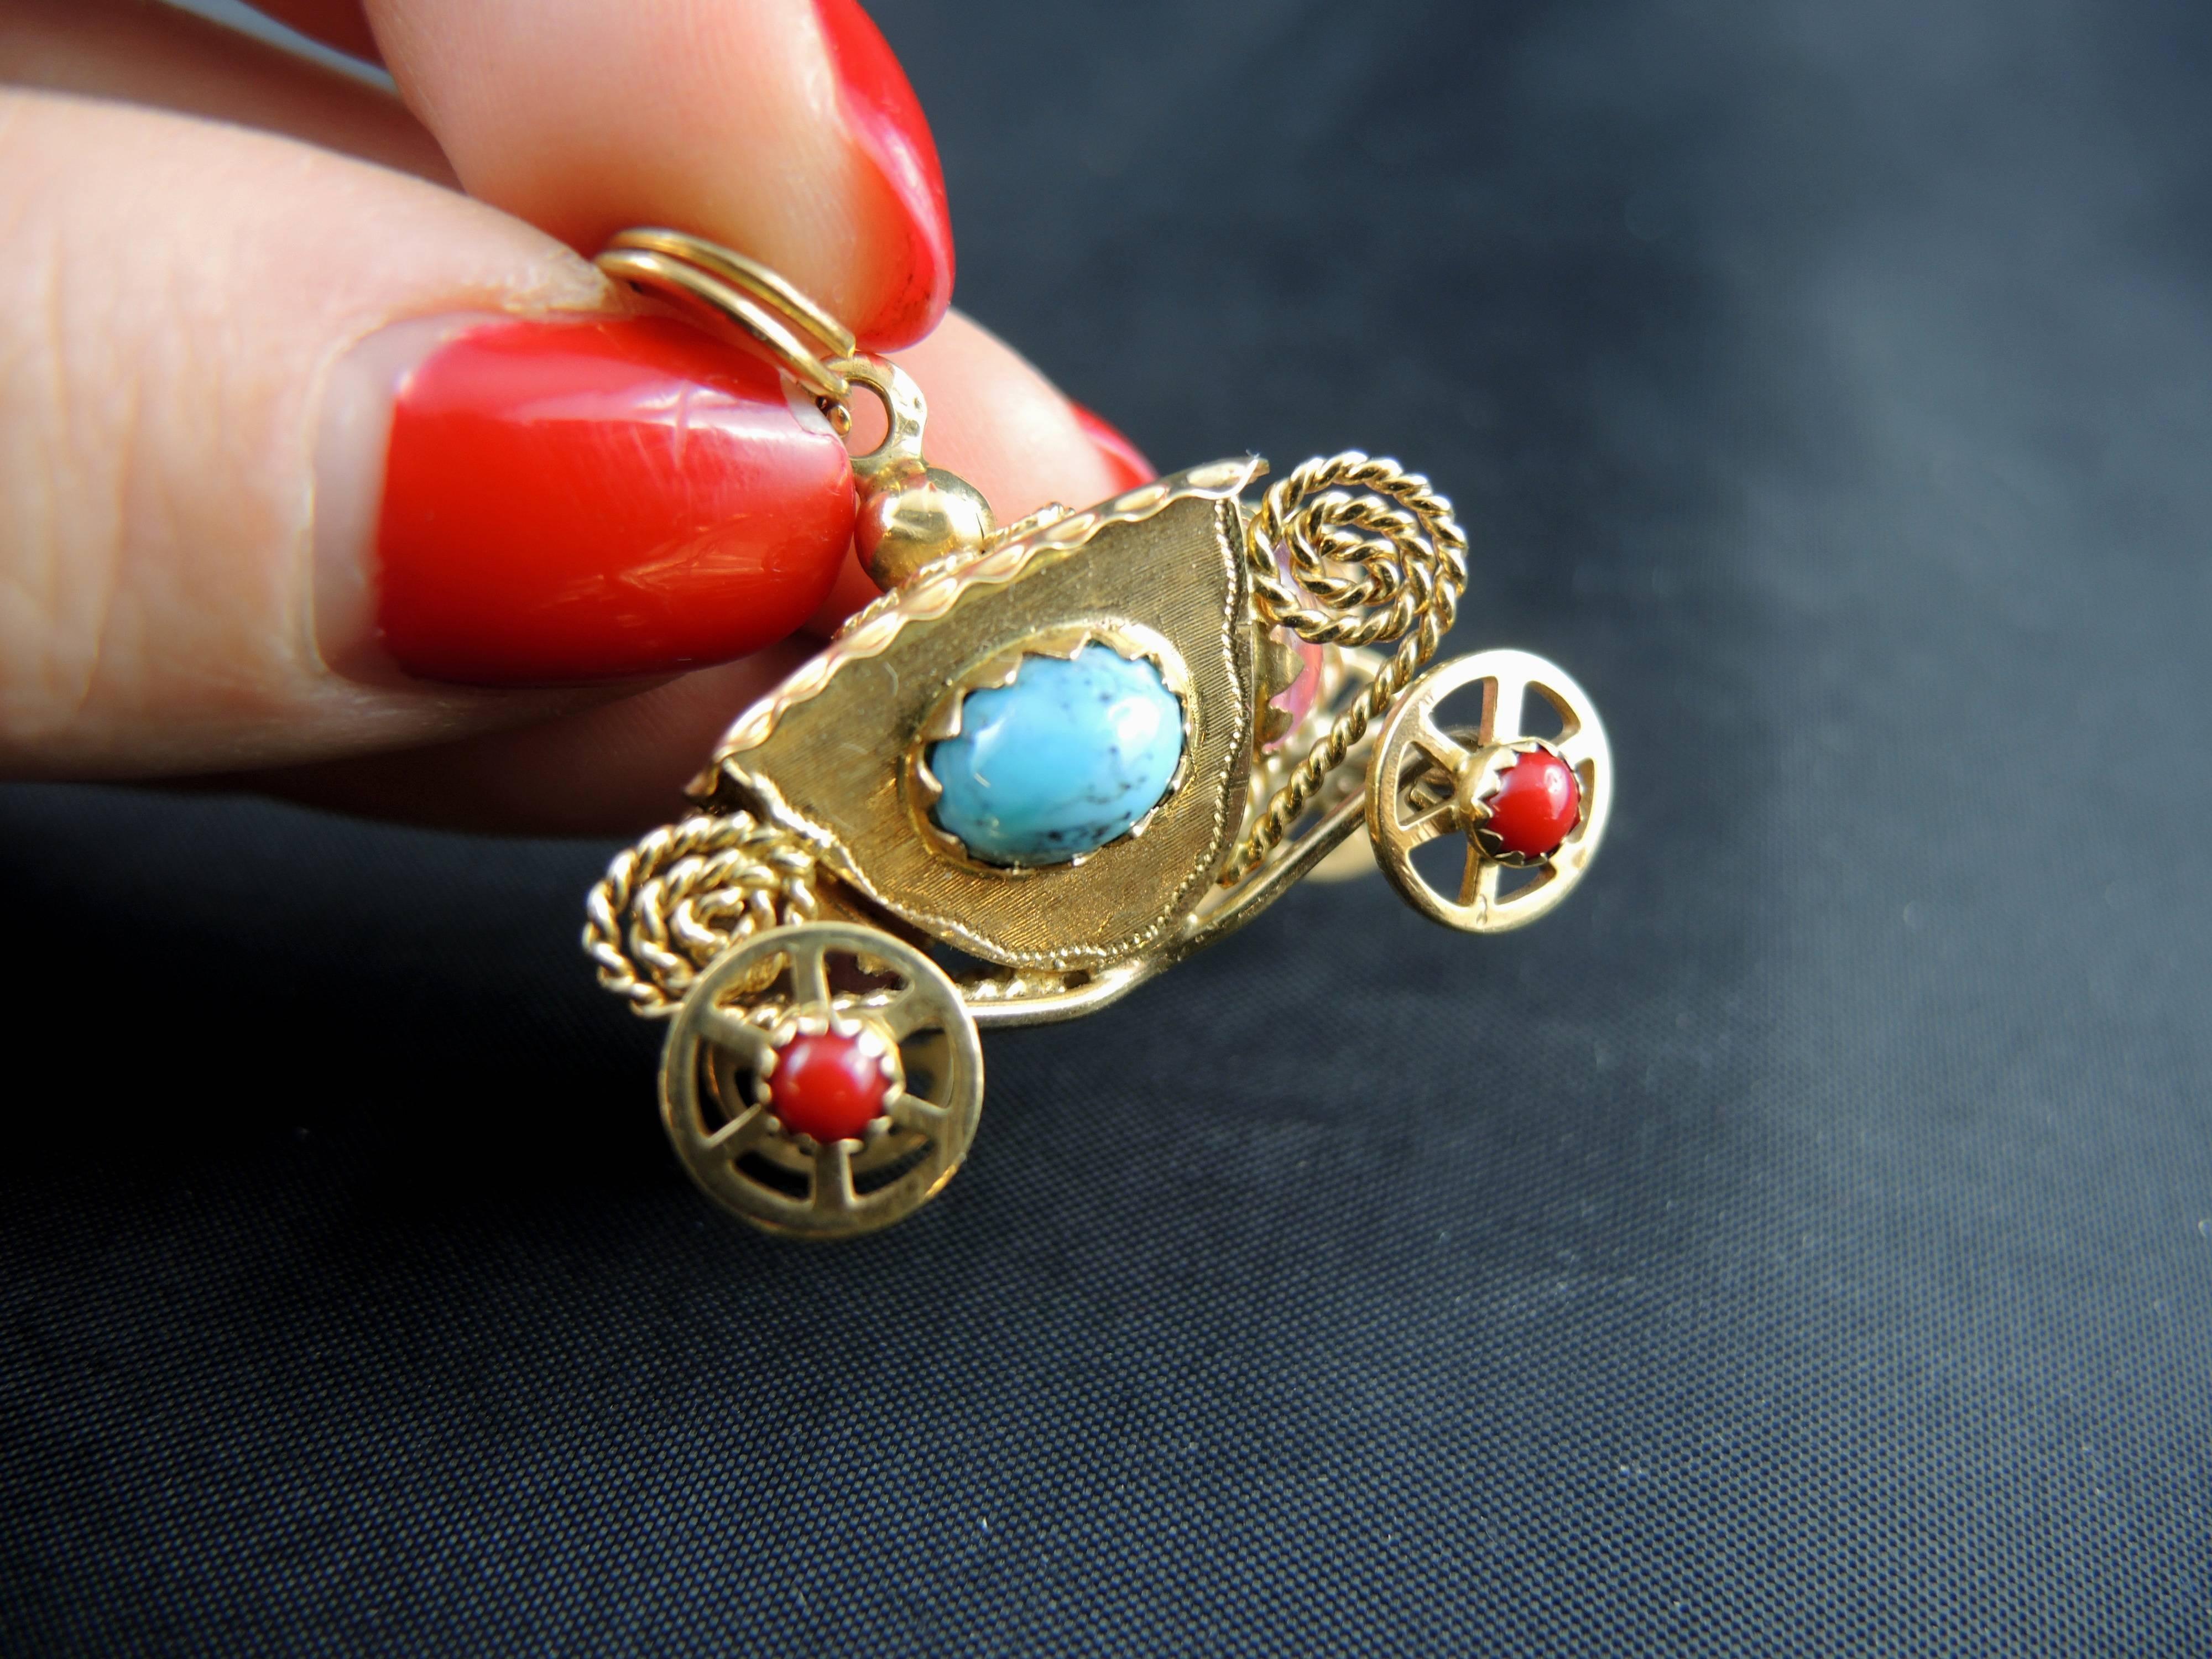 18 kt yellow gold Rolling Coach pendant (quality mark:owl), set with colored stones.

Circa 1970.

Weight:10.80g
Height: 3.00 cm